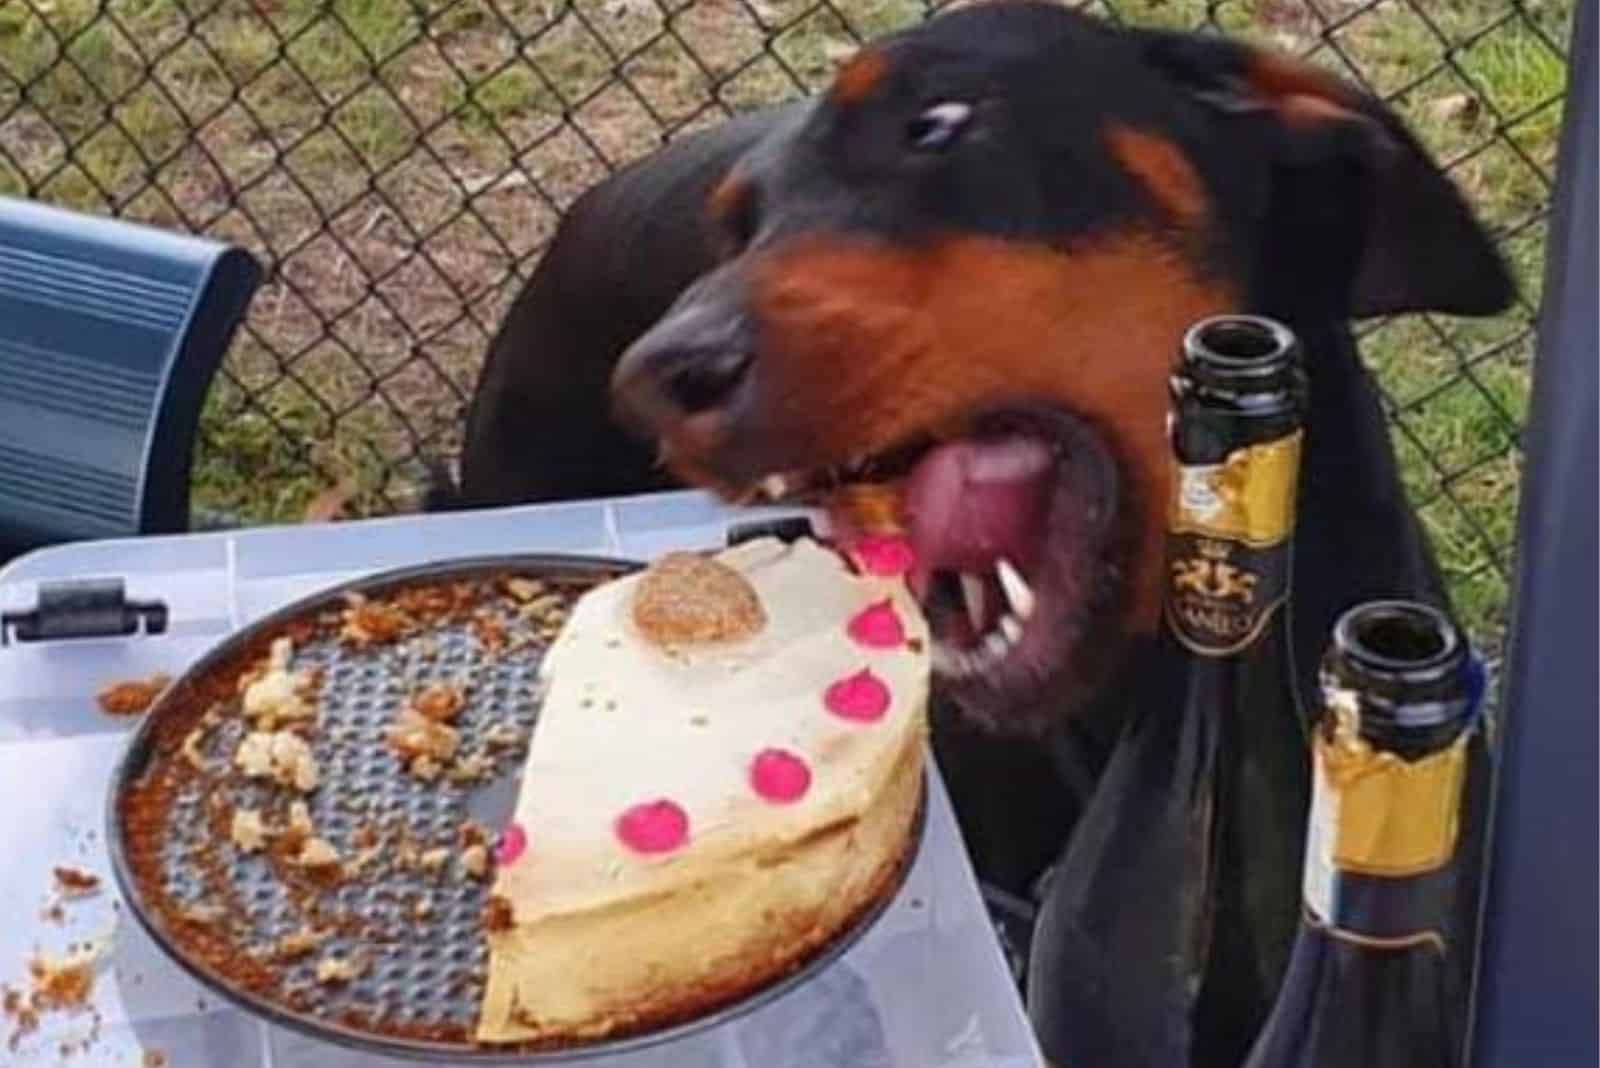 dog eating a cake from the table